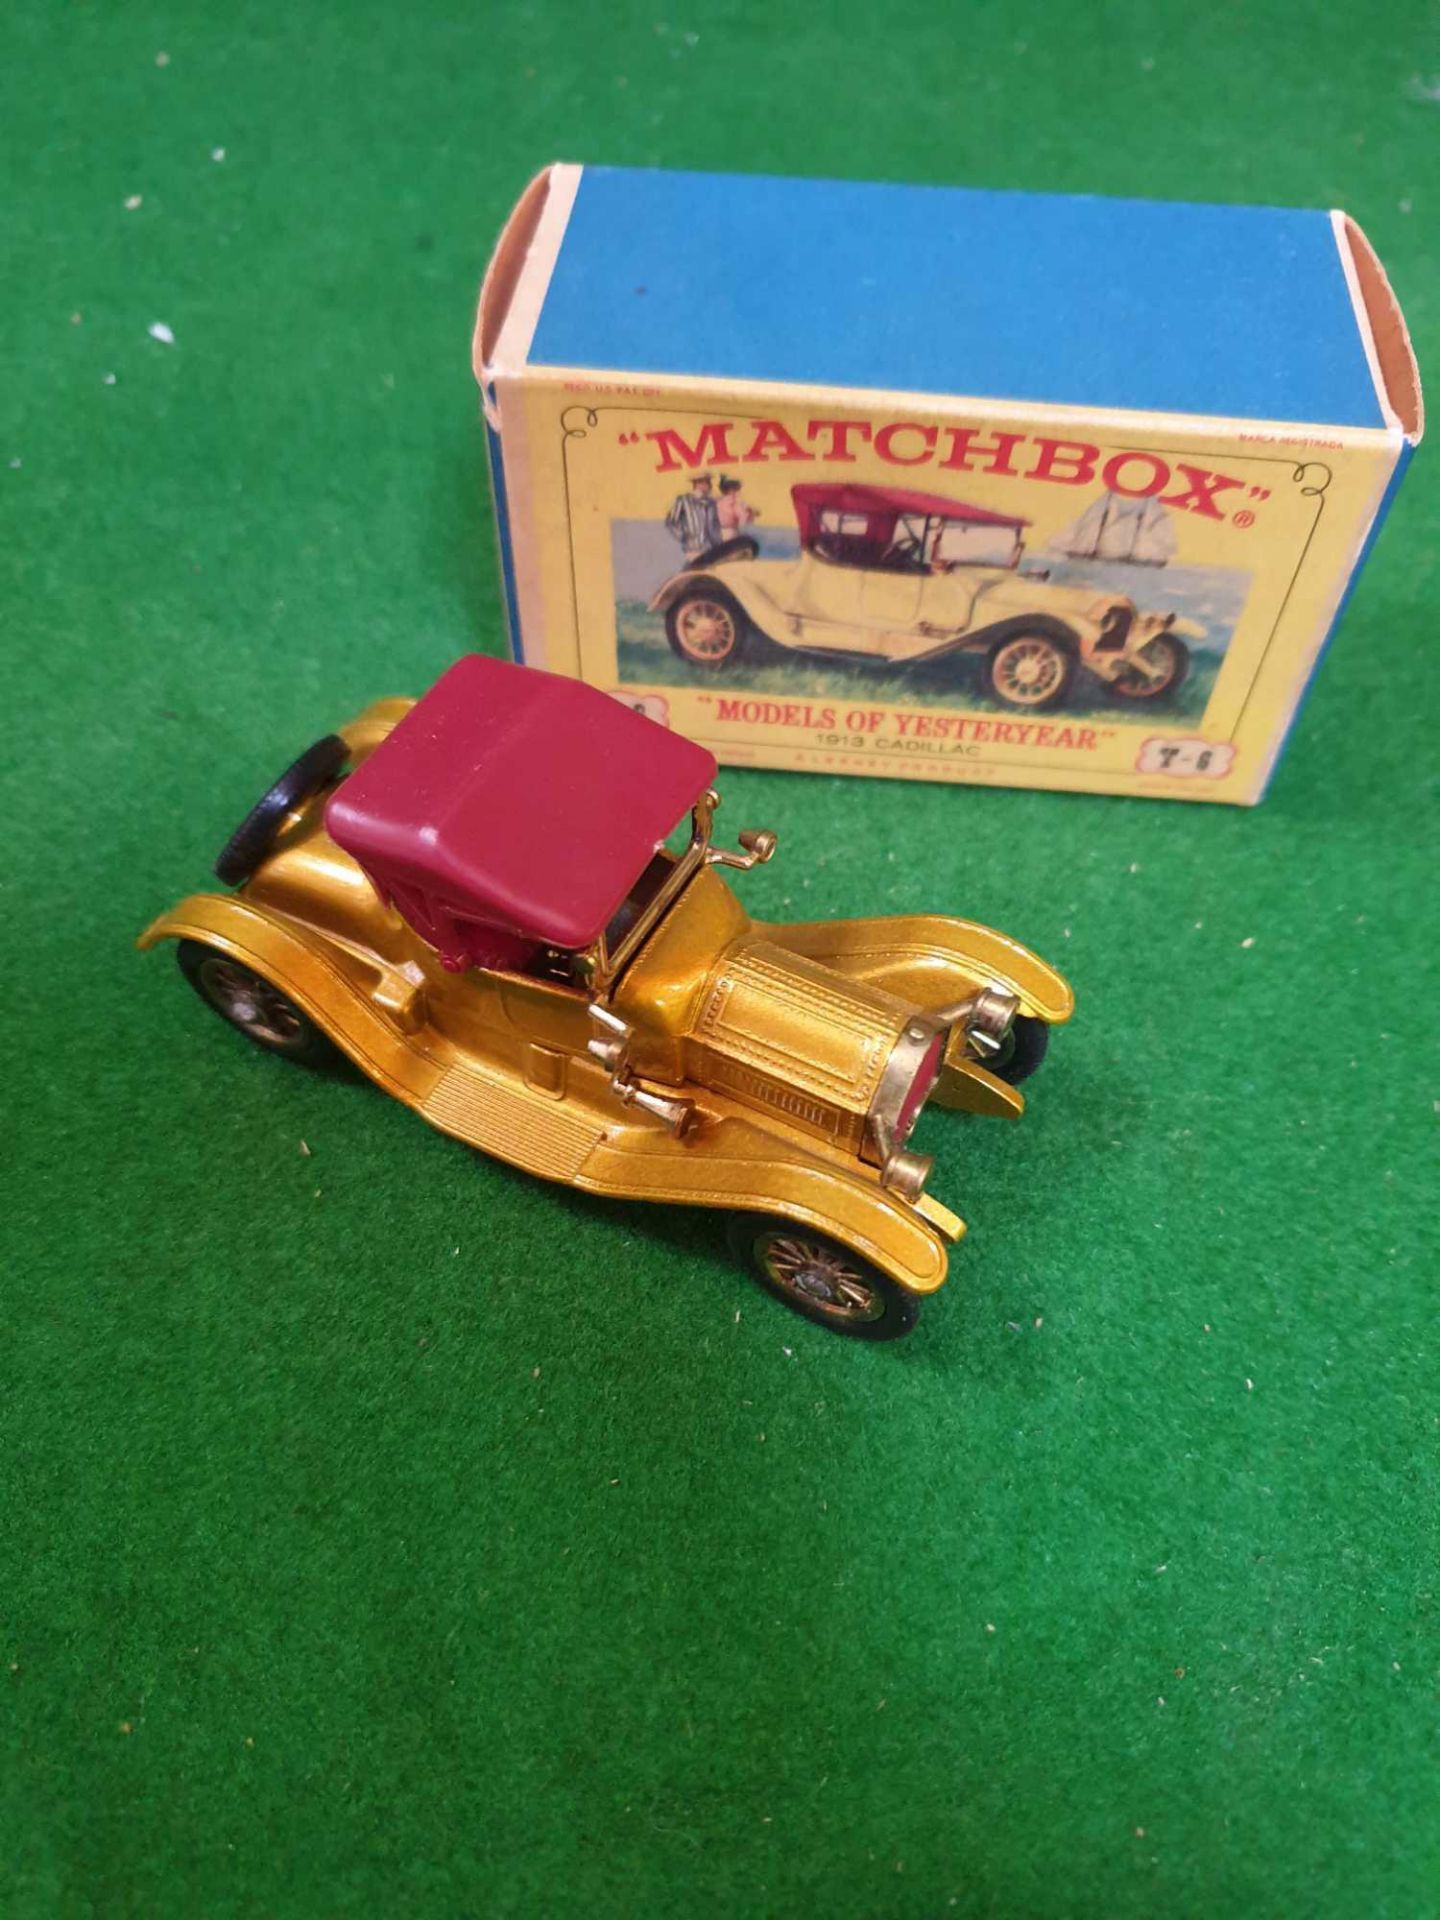 Matchbox Models Of Yesteryear Y6 1913 Cadillac Gold Red Roof Mint Model Firm Box - Image 2 of 3